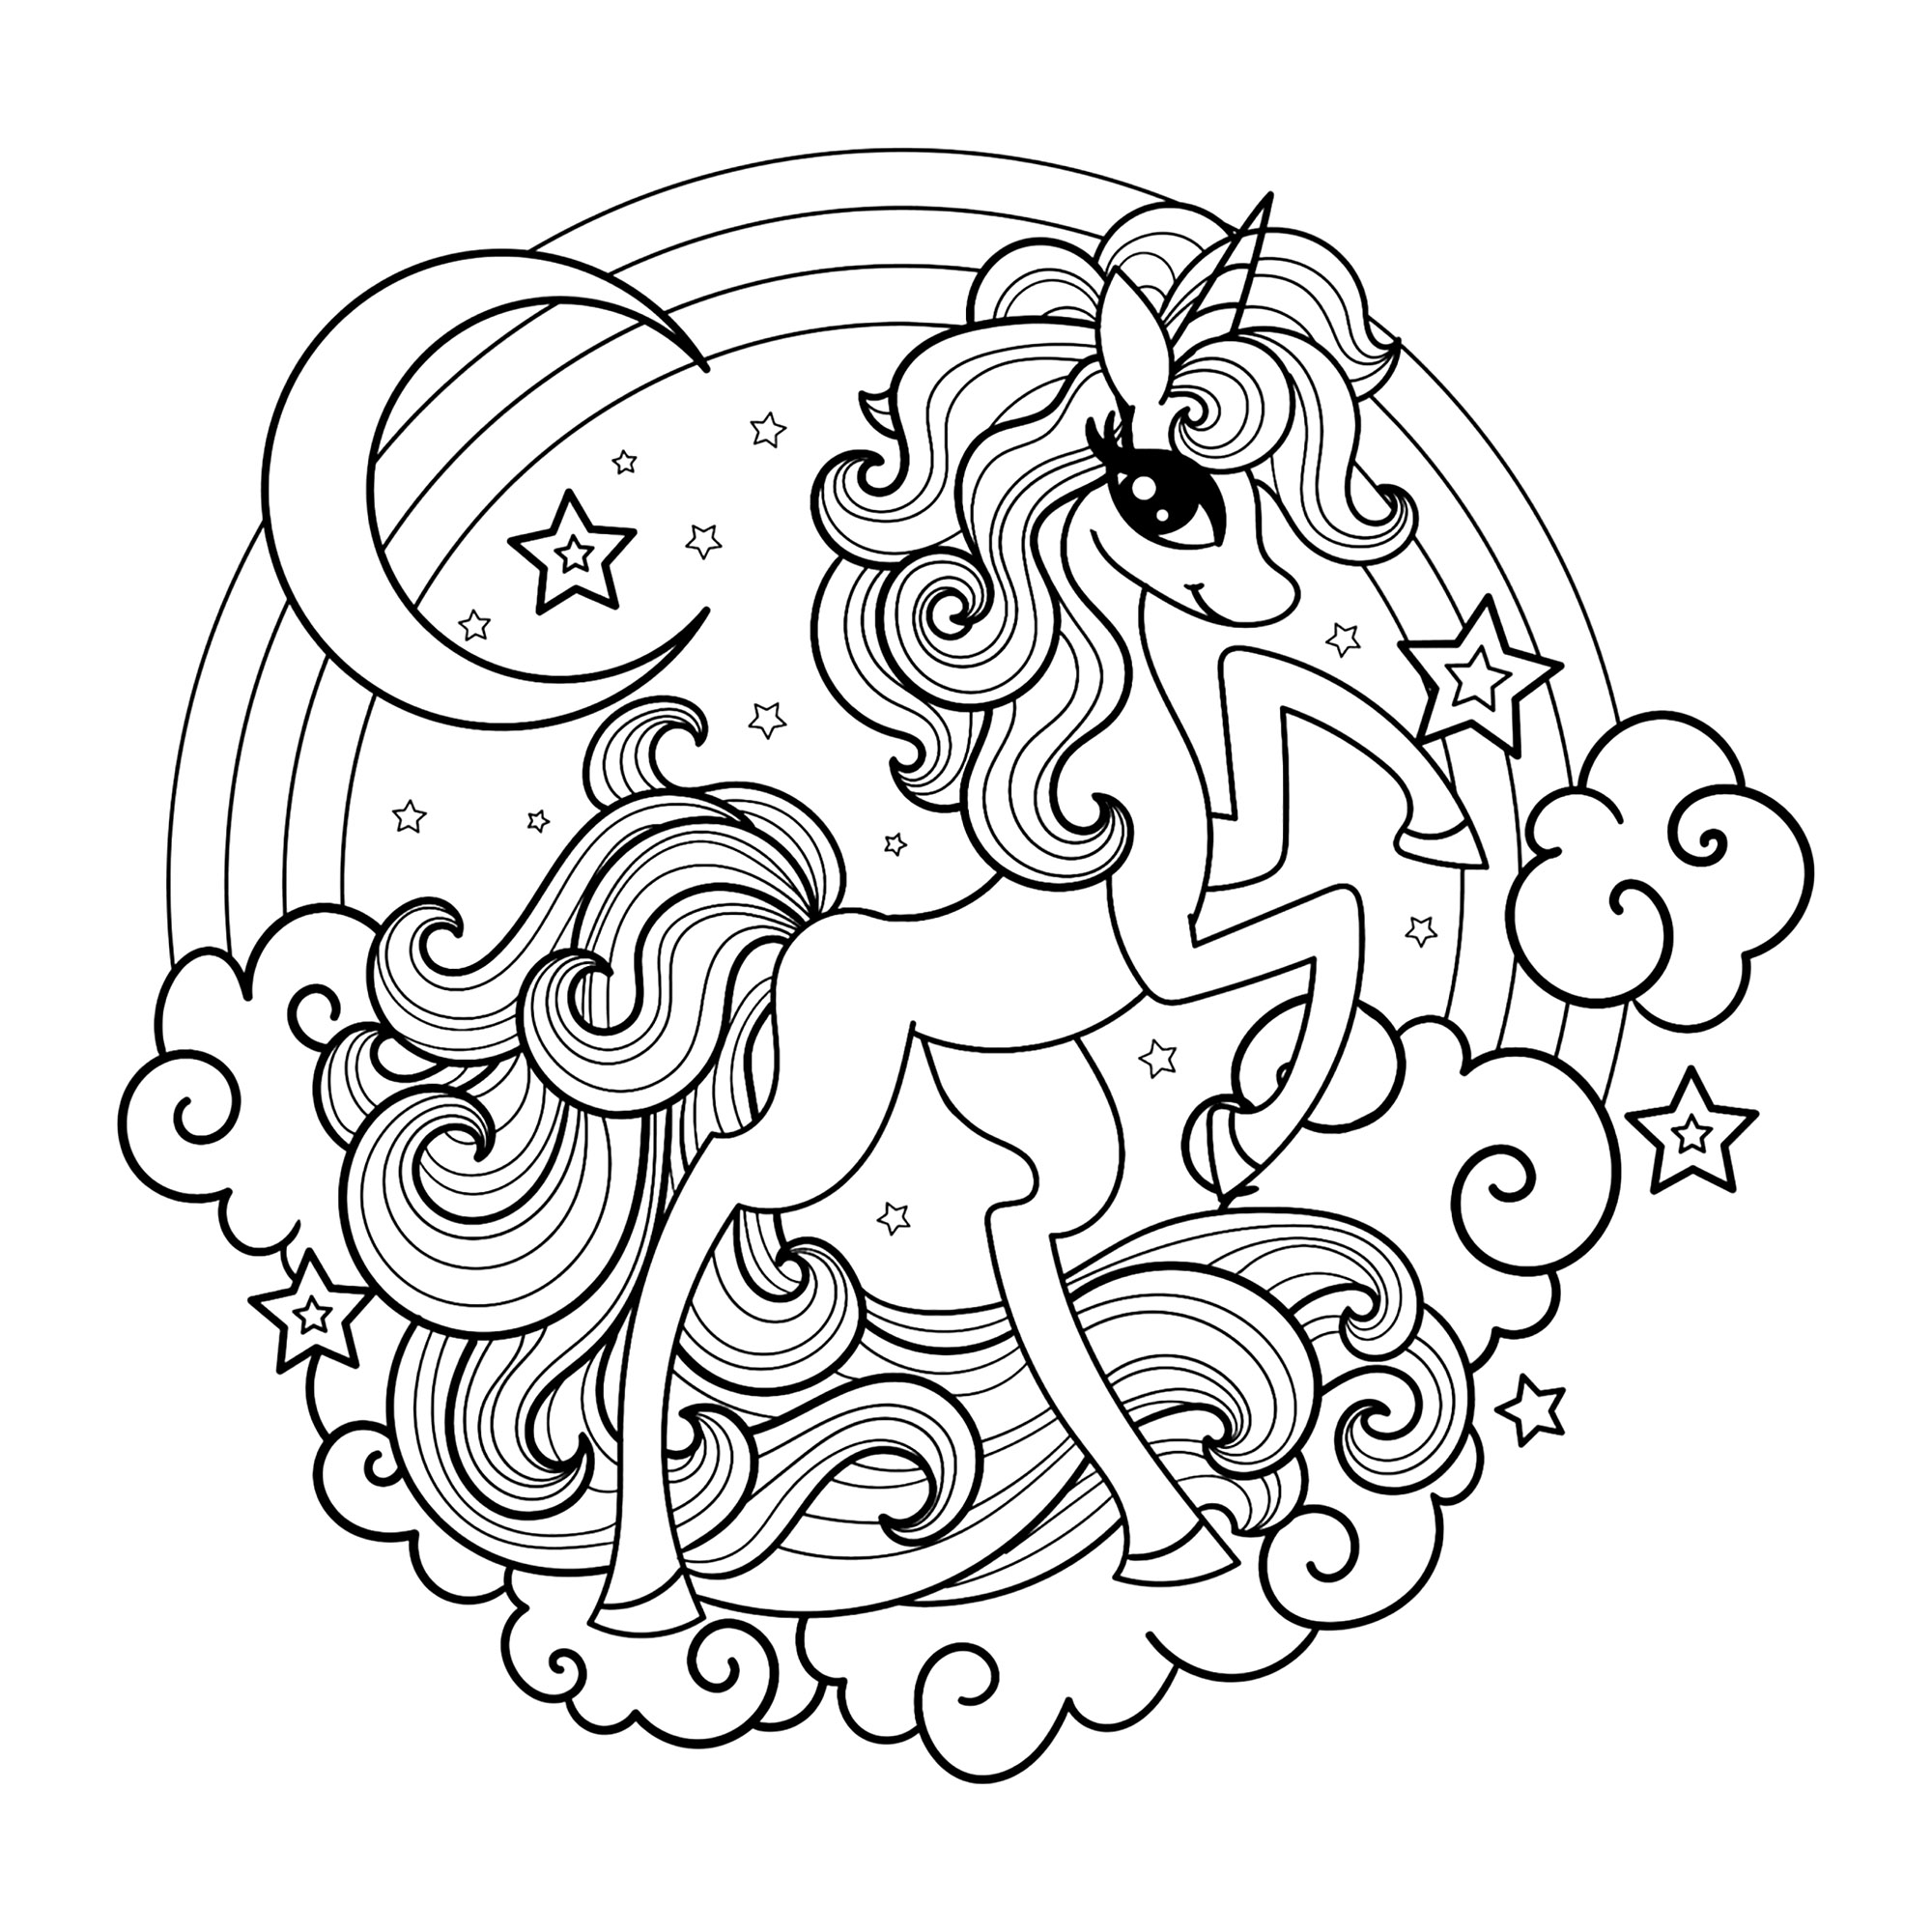 A stylish, modern unicorn. Color this pretty unicorn and the rainbow behind it, as well as the moon, clouds and stars around it, Source : 123rf   Artist : Zerlina